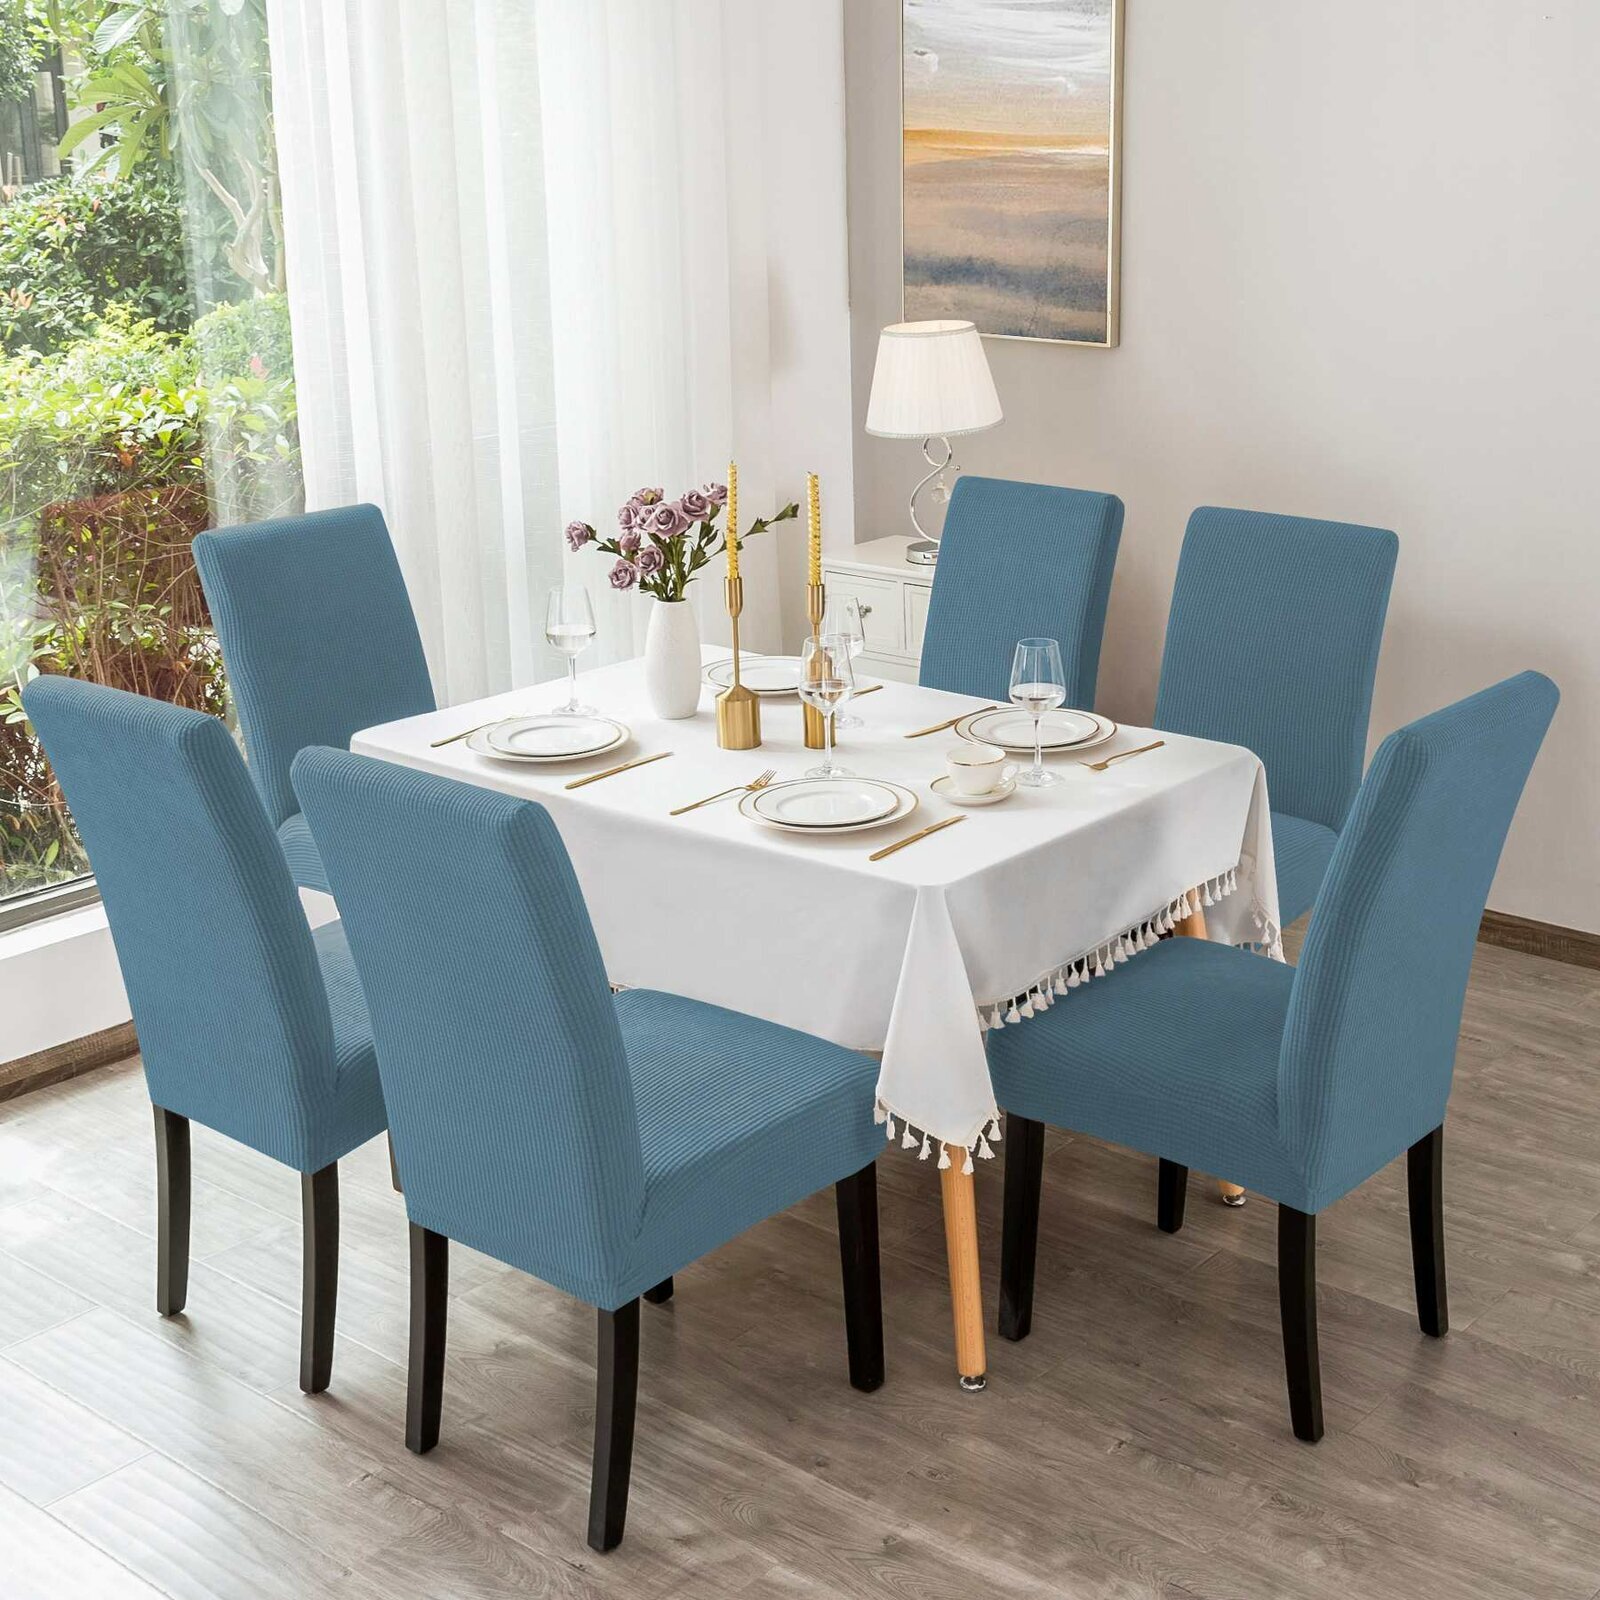 Modern Dining Chair Covers - Ideas on Foter